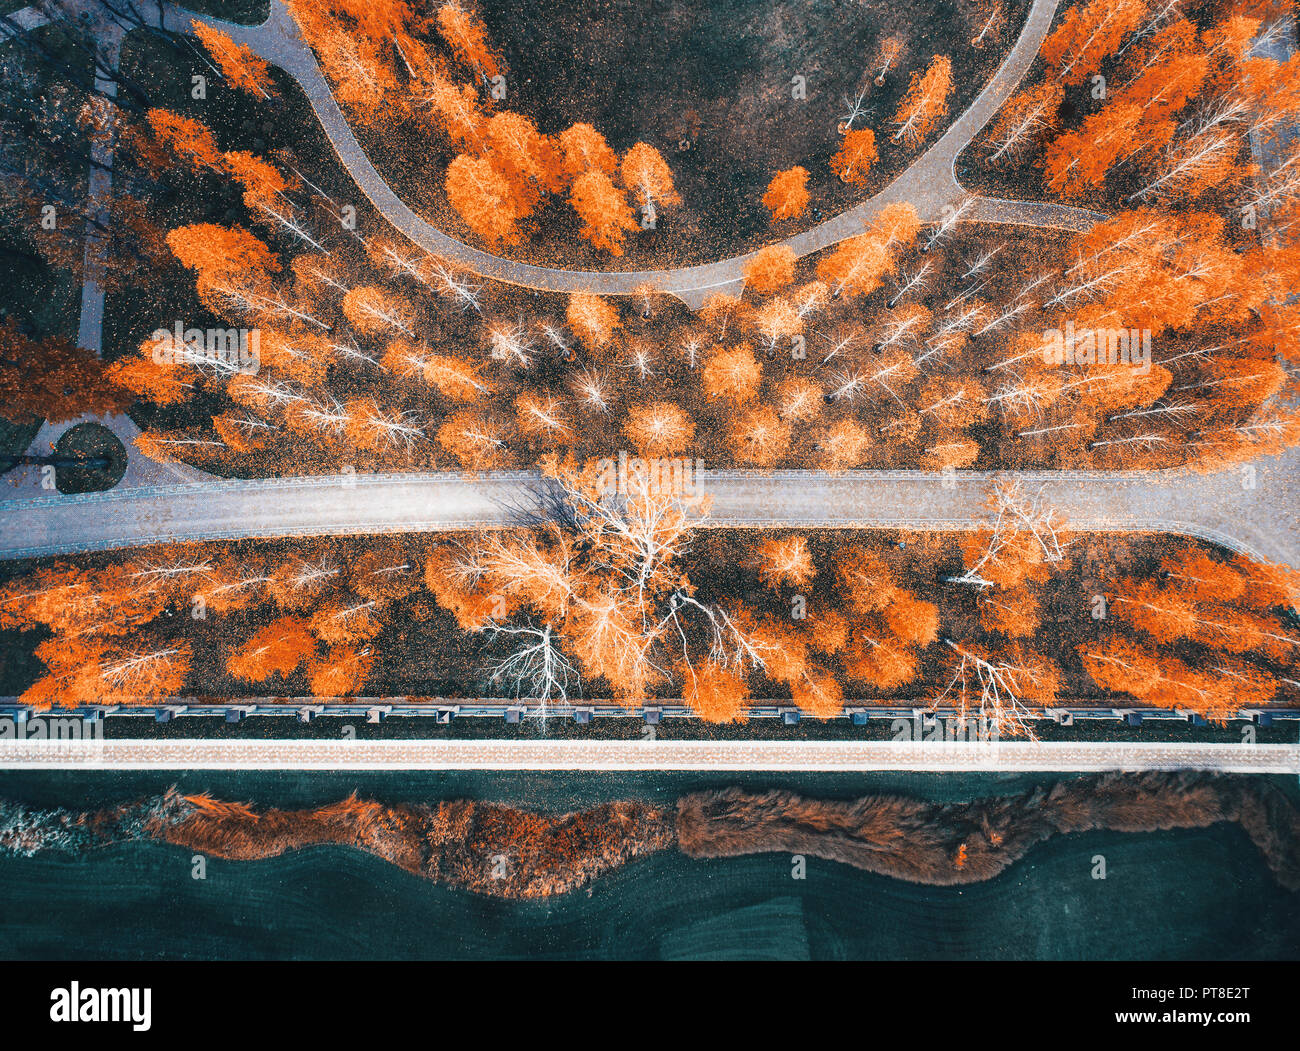 Aerial view of colorful autumn park in europe in the evening. Landscape with trees with orange leaves, field with green grass and paths in fall. Scene Stock Photo